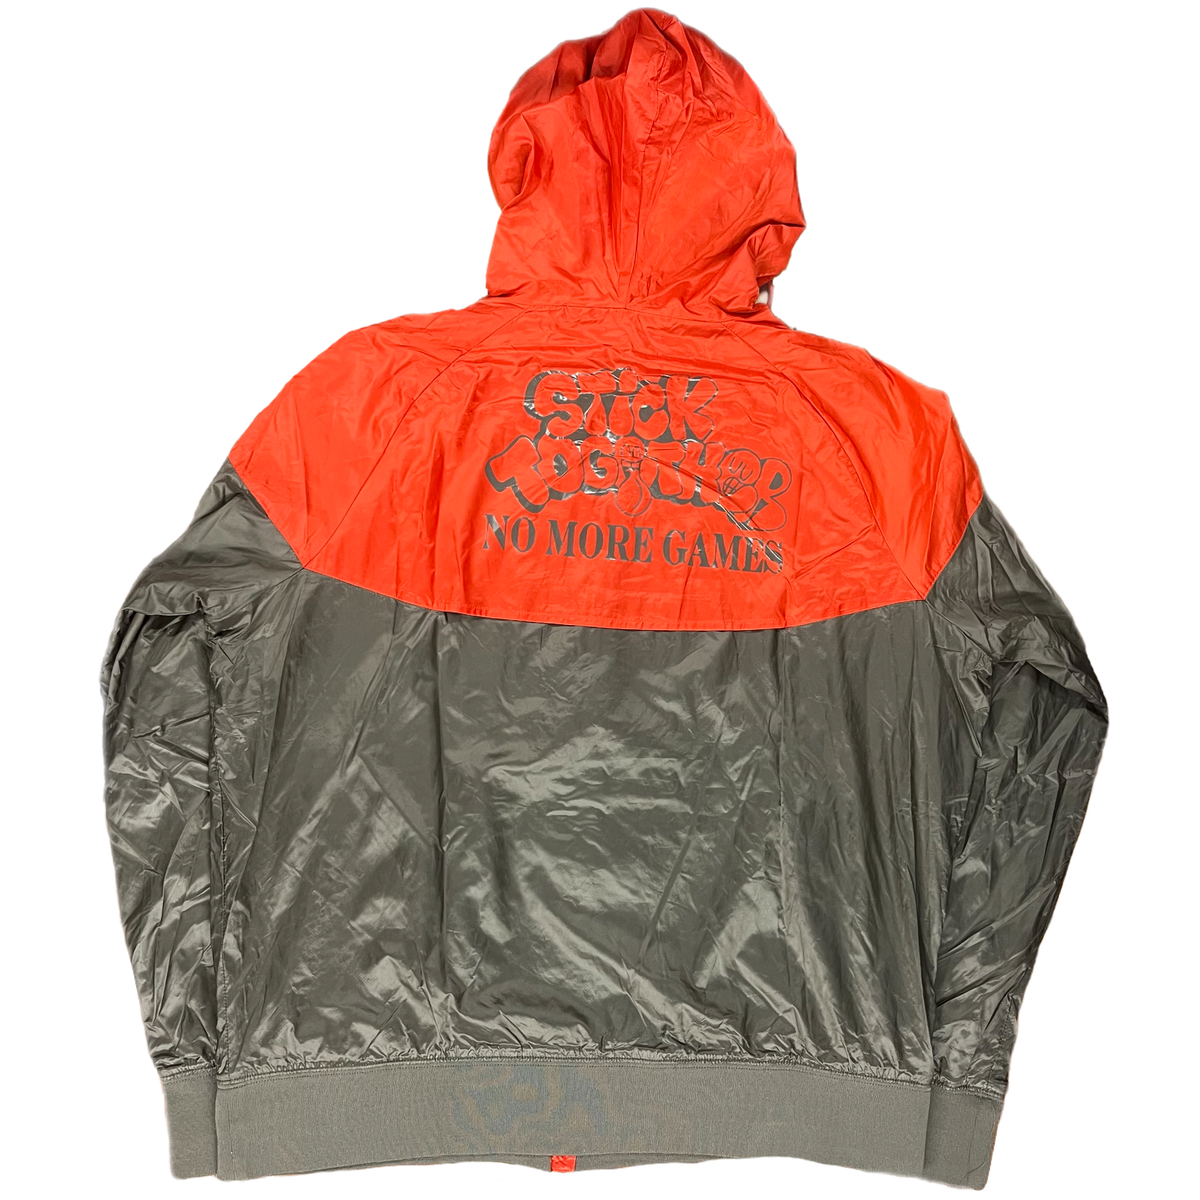 Stick Together &quot;No More Games&quot; Water Repellant Nike Windbreaker